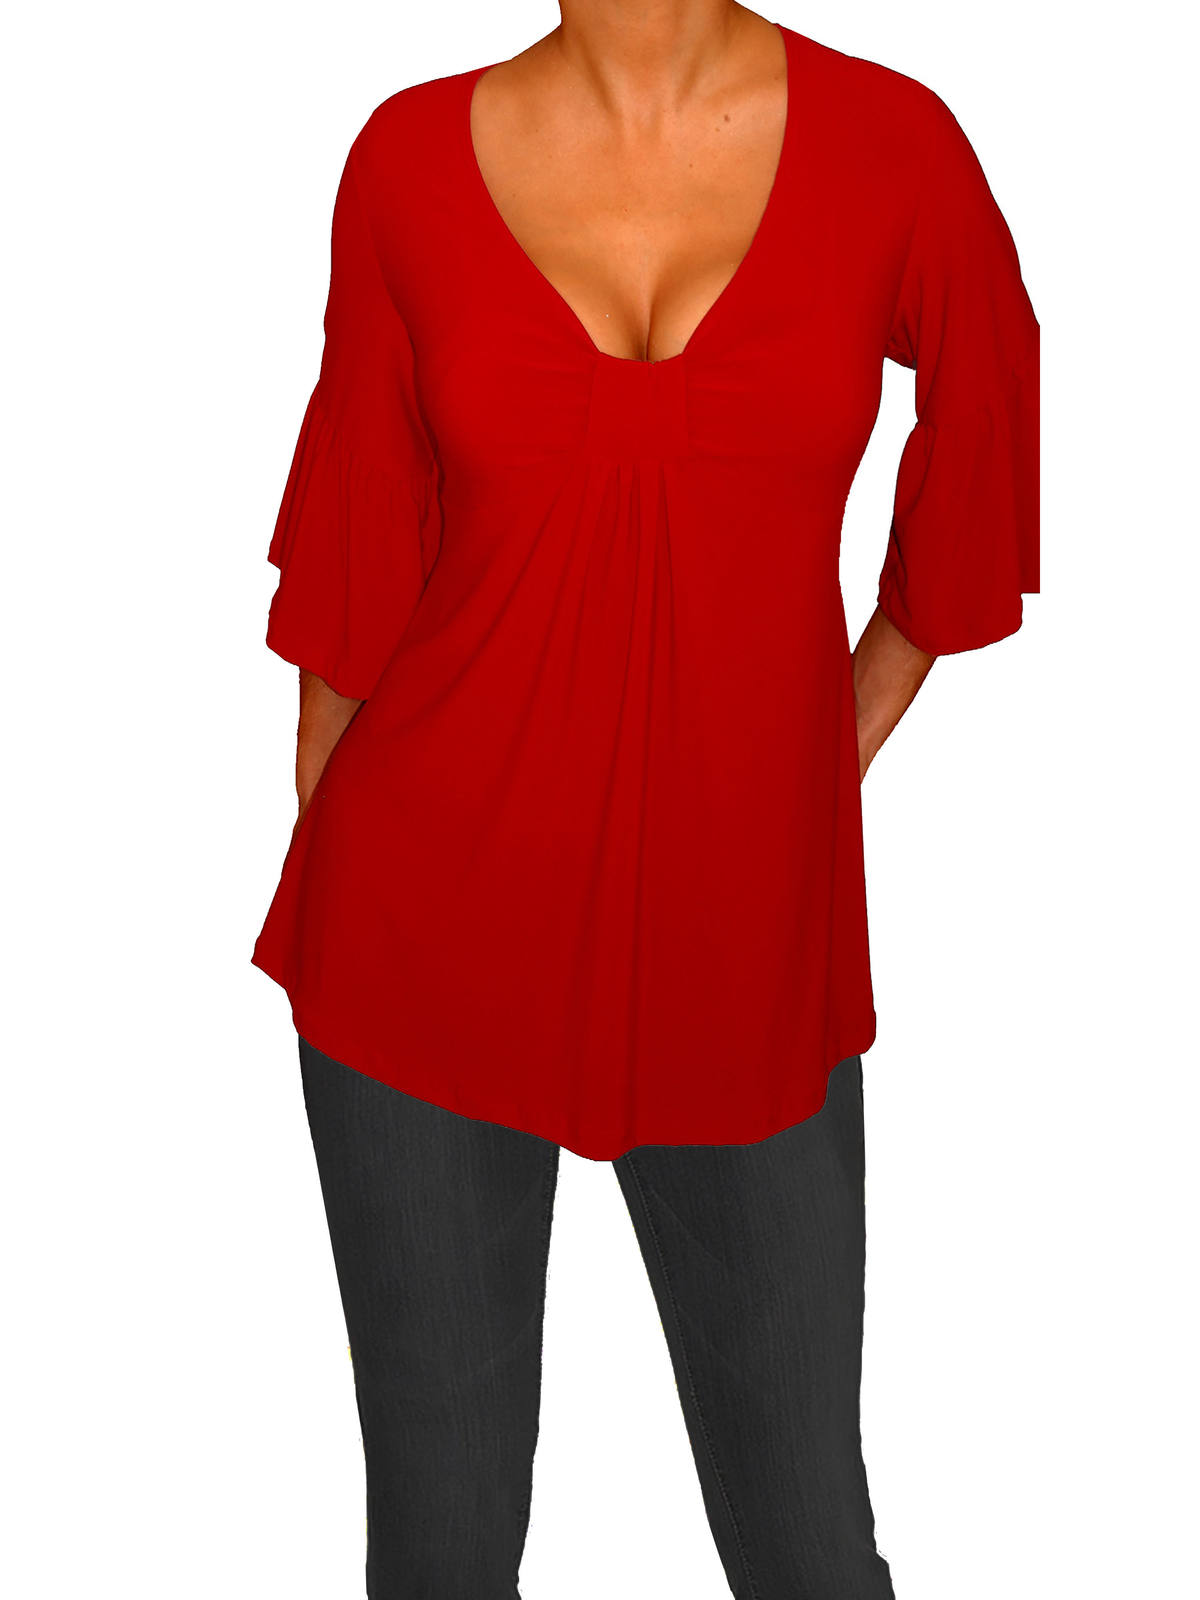 Plus size red tops for women